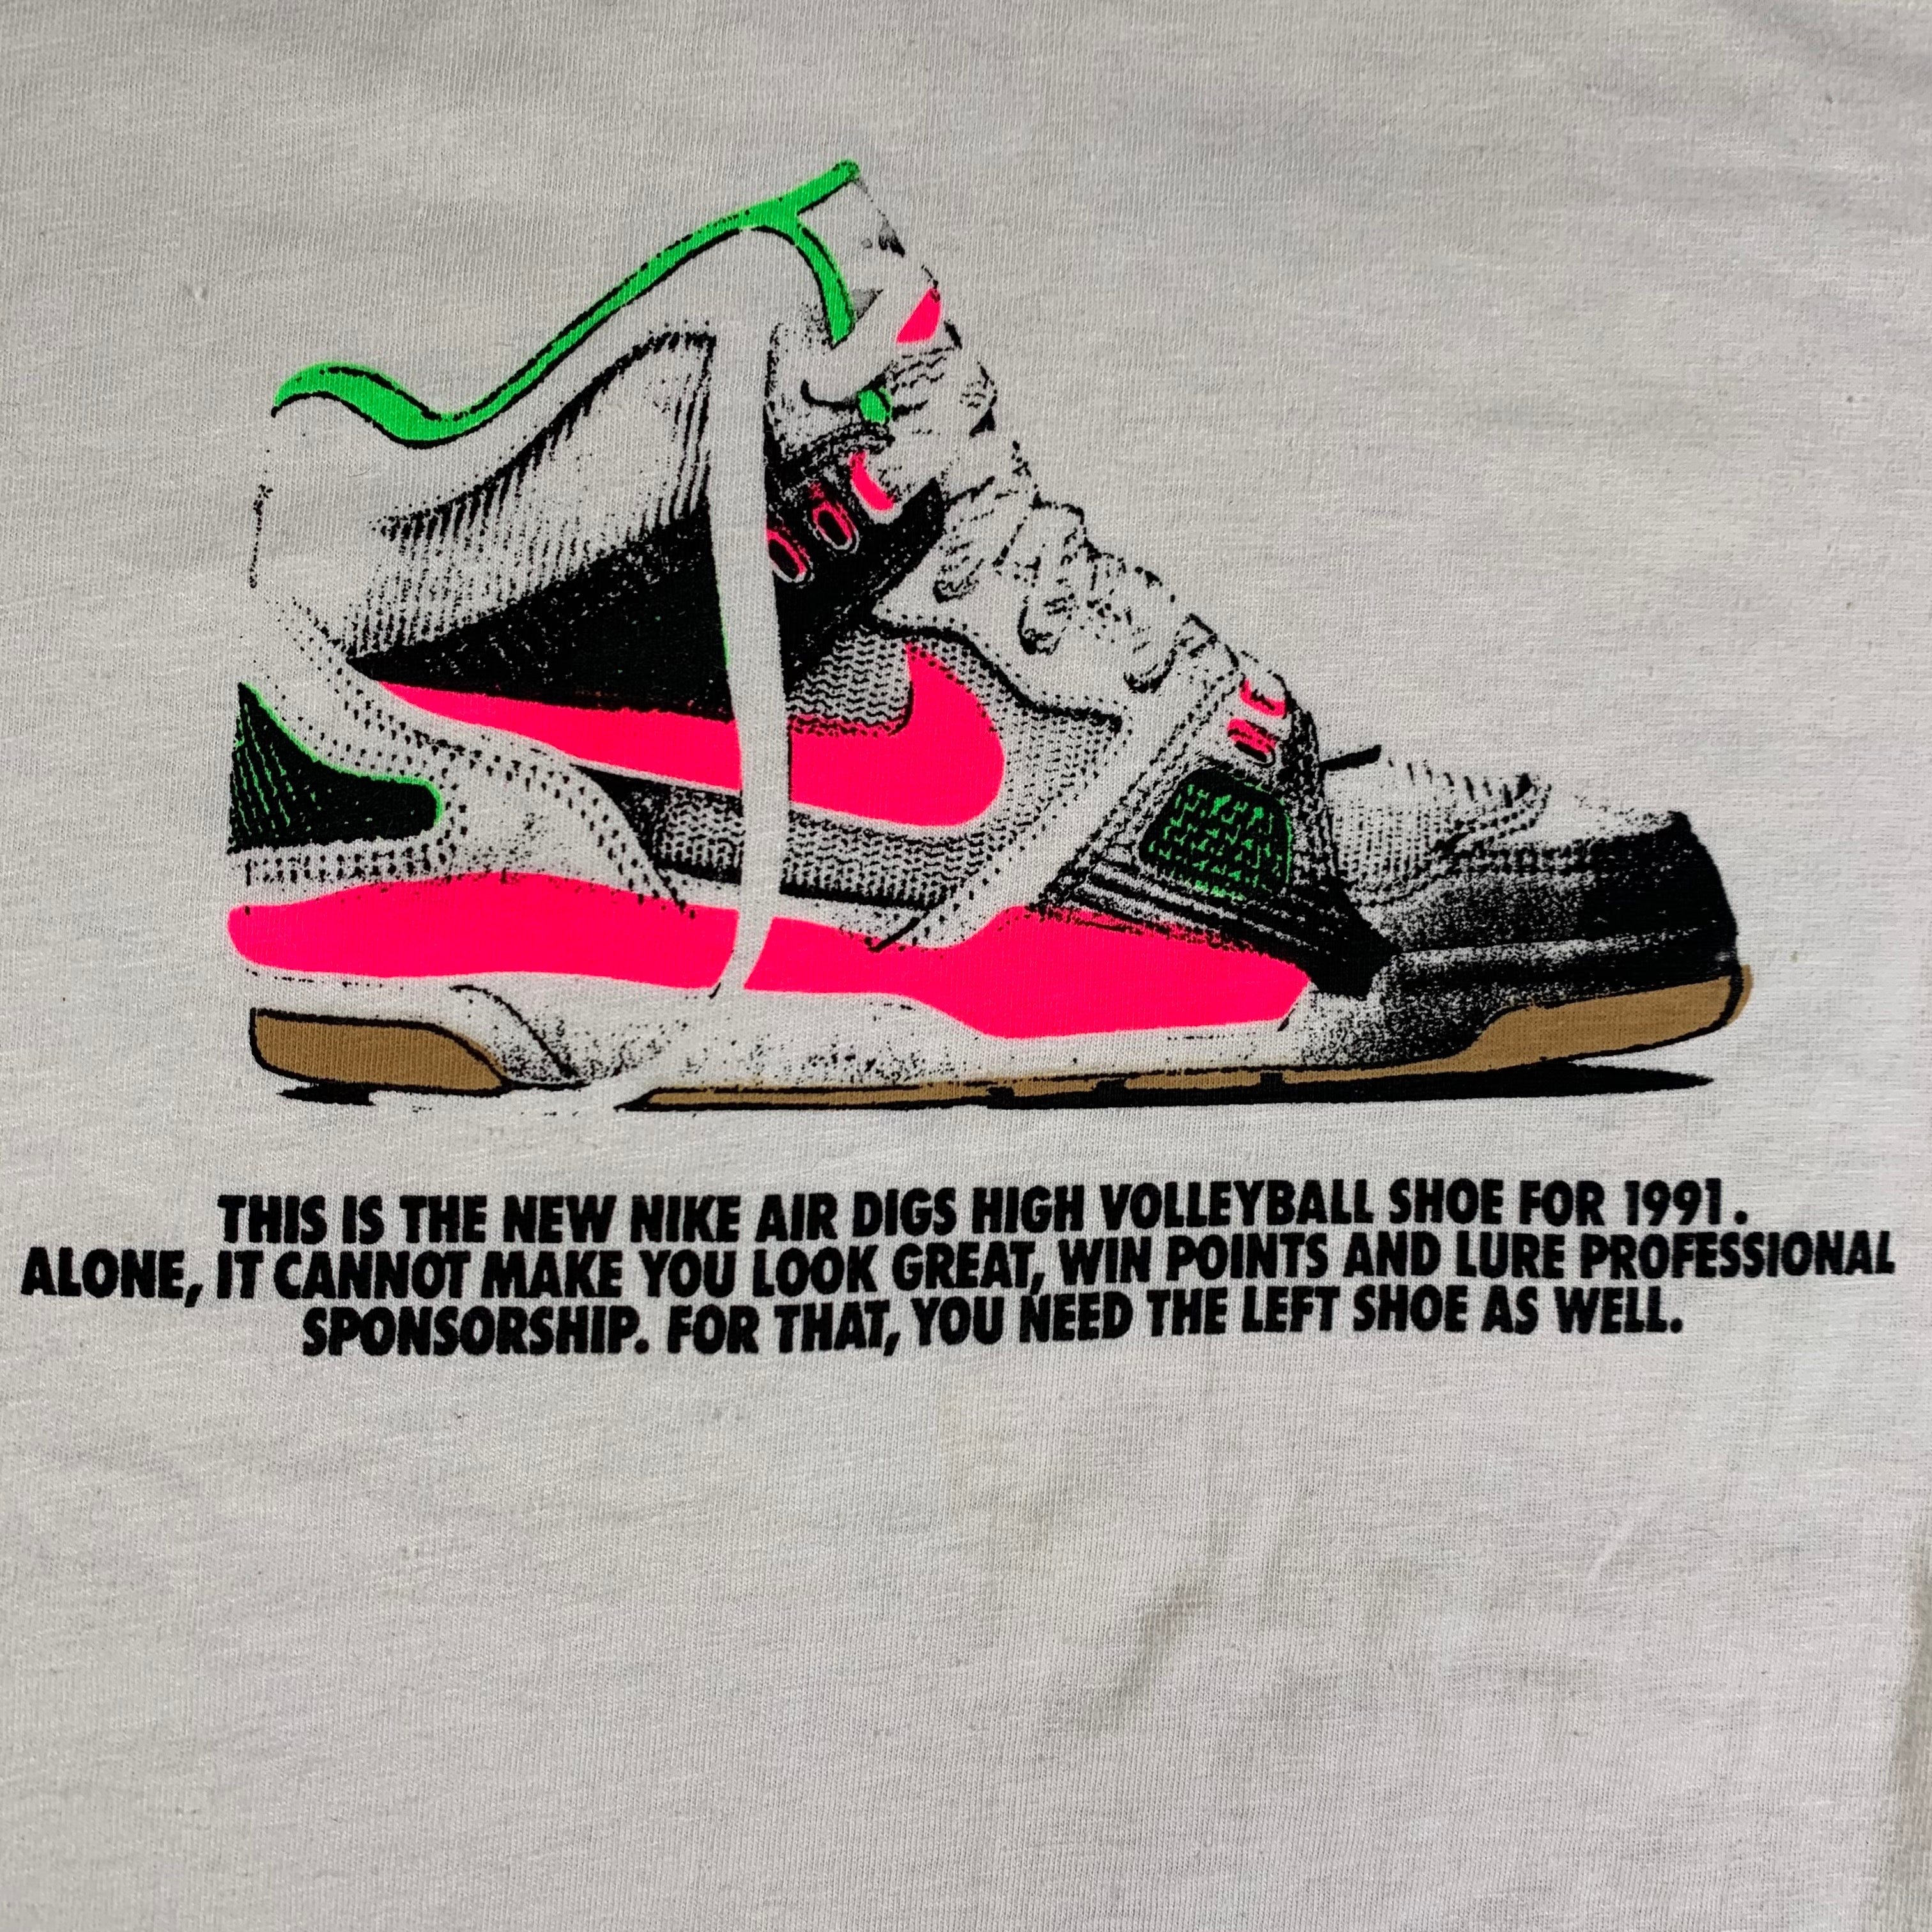 Vintage Nike Air Digs "Volleyball Shoe" T-Shirt |